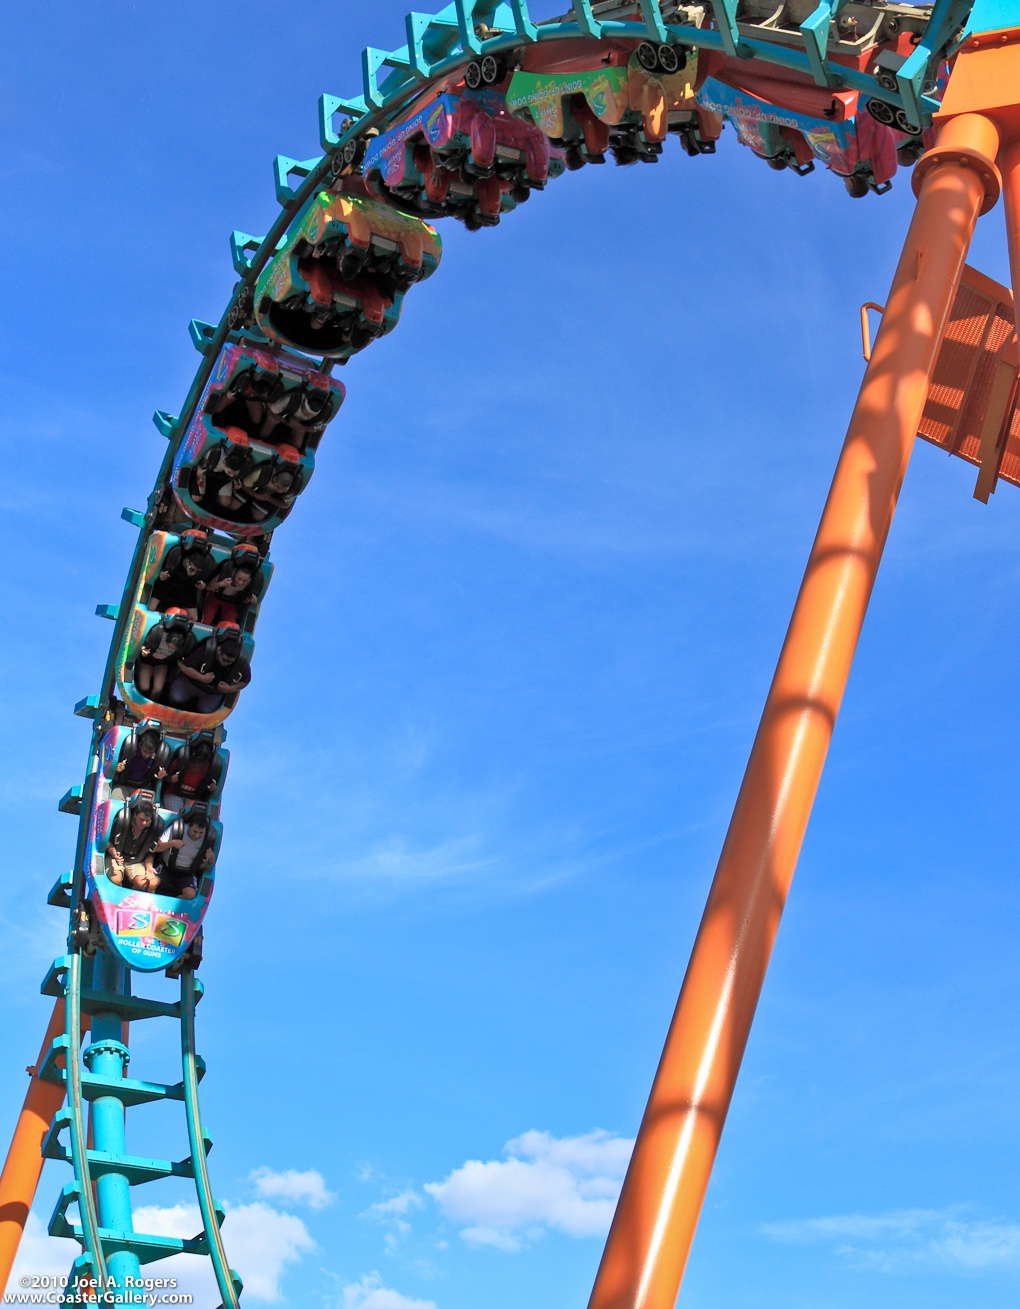 Over-the-shoulder restraint harnesses on the Boomerang coaster at Six Flags